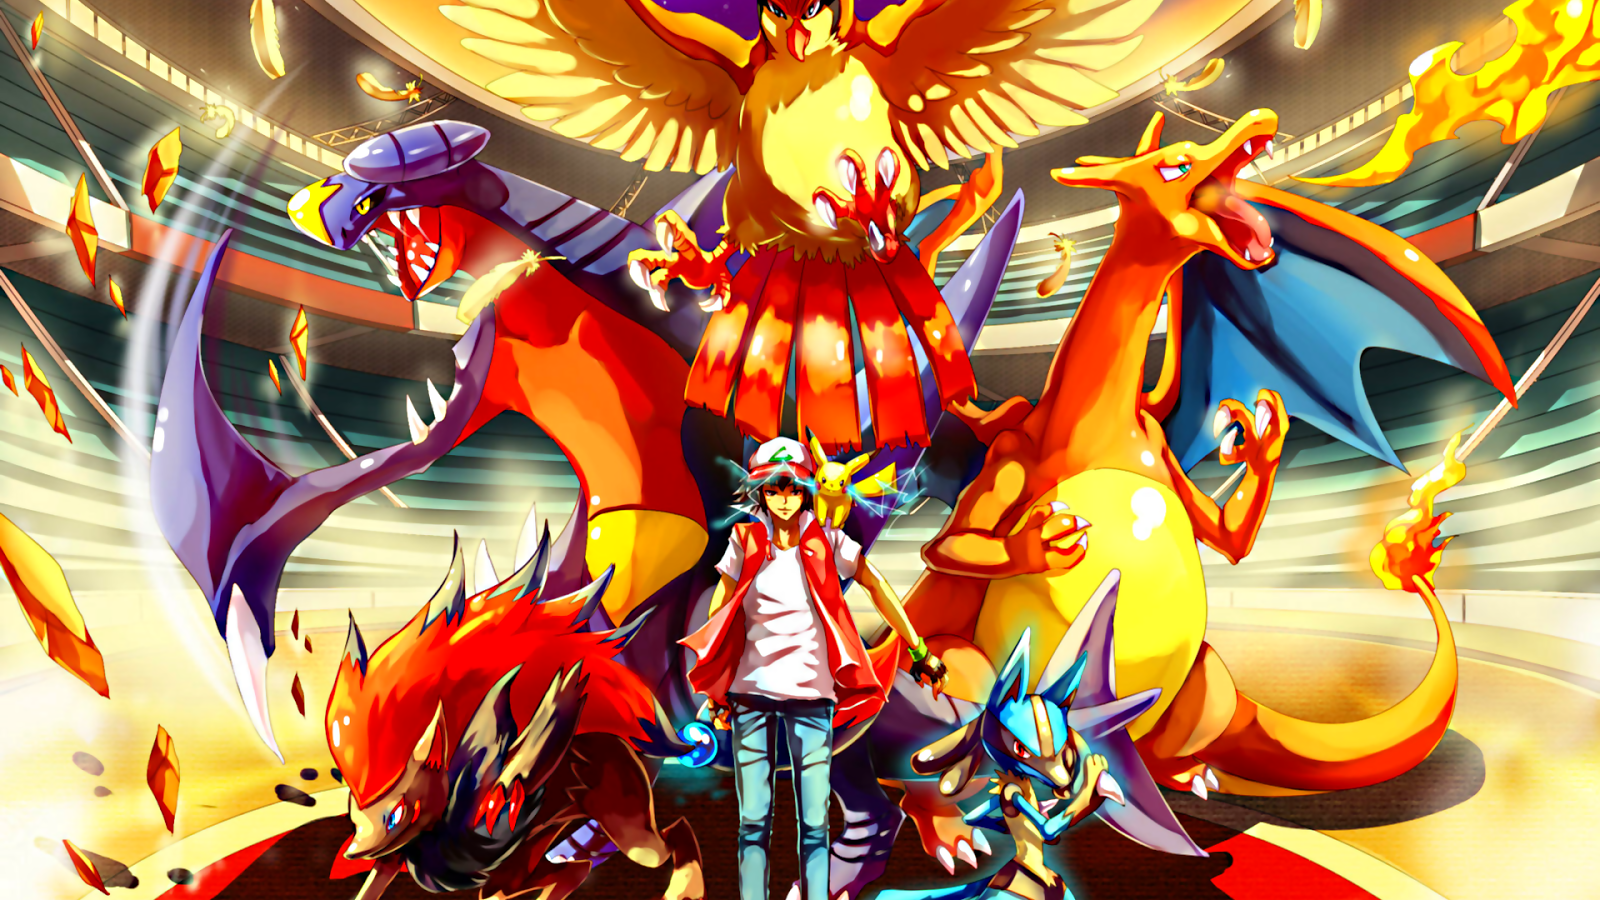 Cool Fire Pokemon Wallpaper Background With